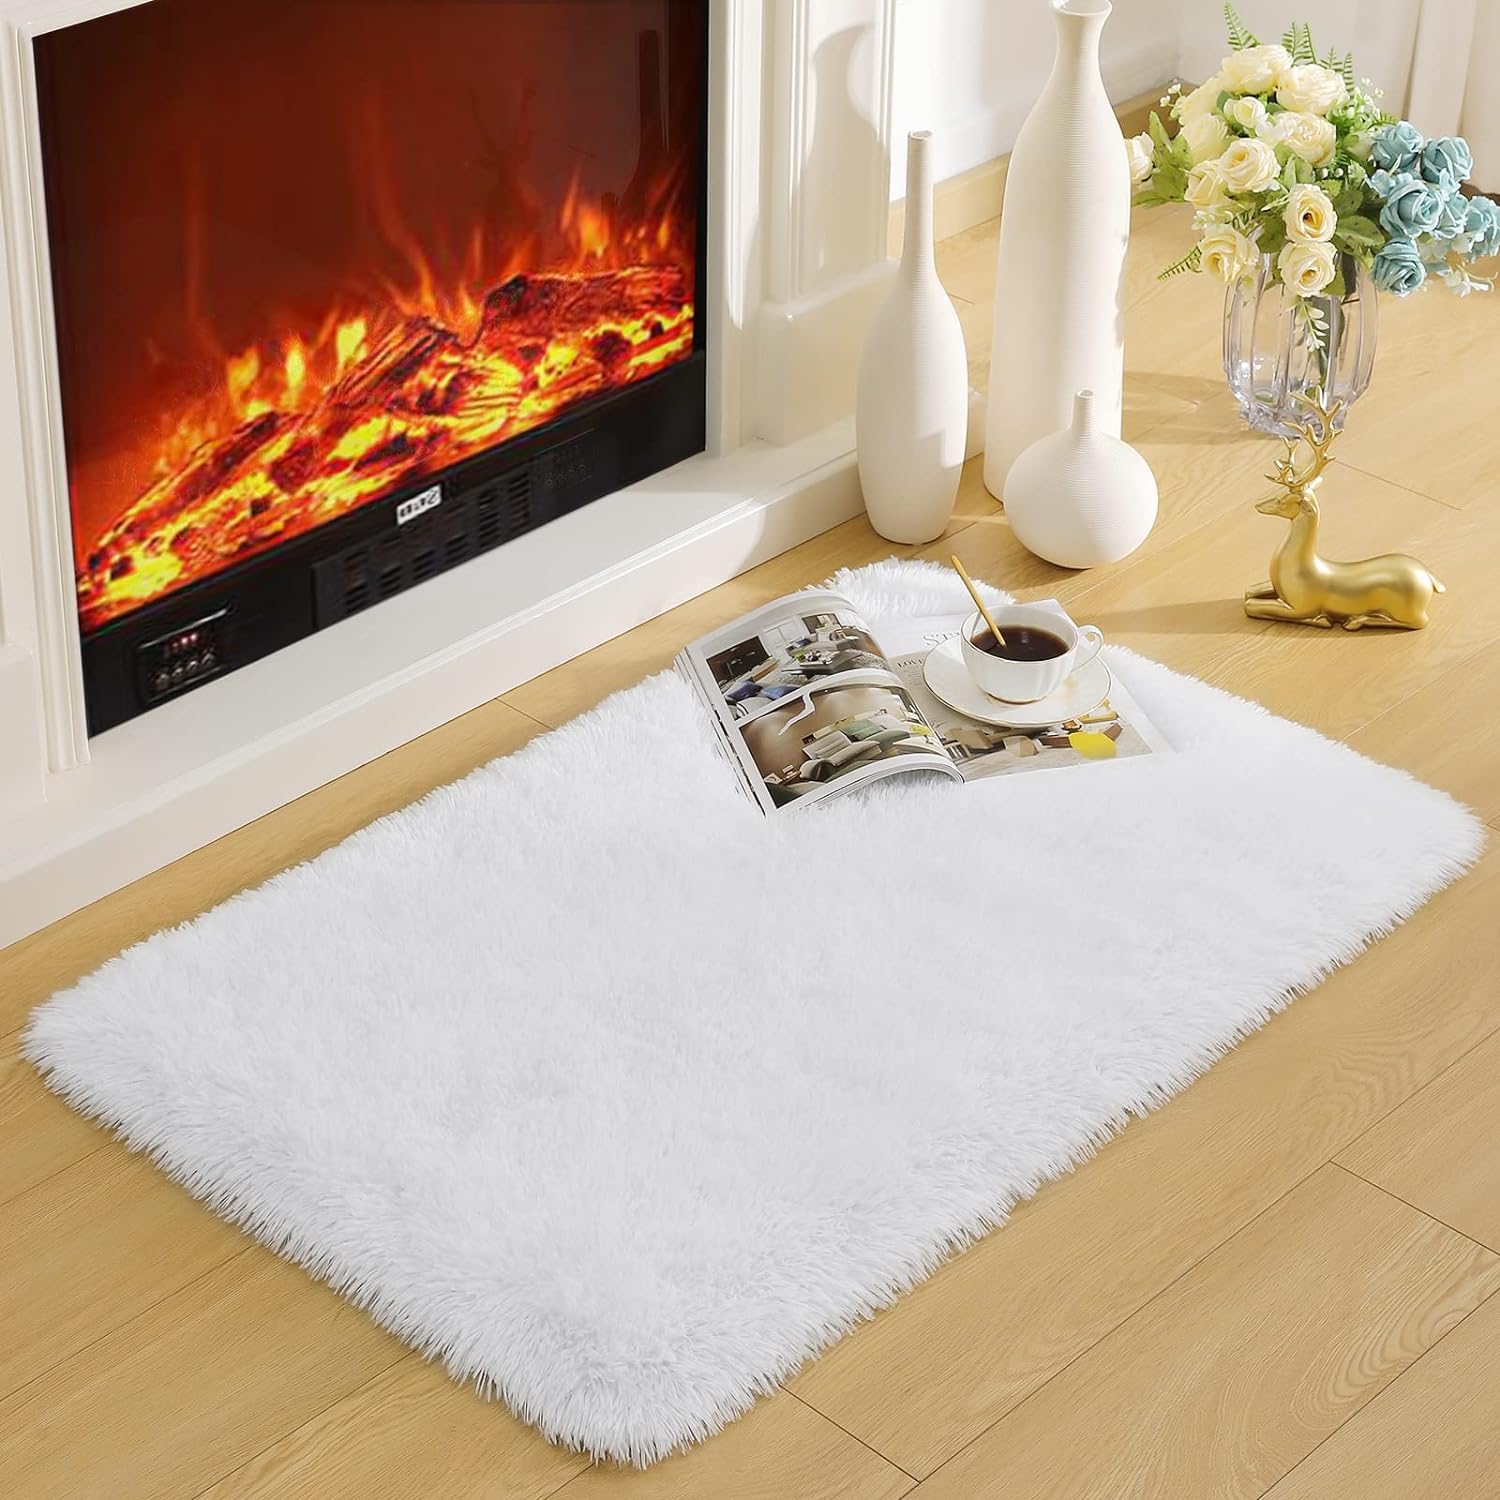 Merelax Rug series, bring you Soft Shaggy Rug and Rugs Shaggy Soft two hot products. With their soft touch, comfortable feet and stylish design, these rugs add warmth and elegance to your home space.